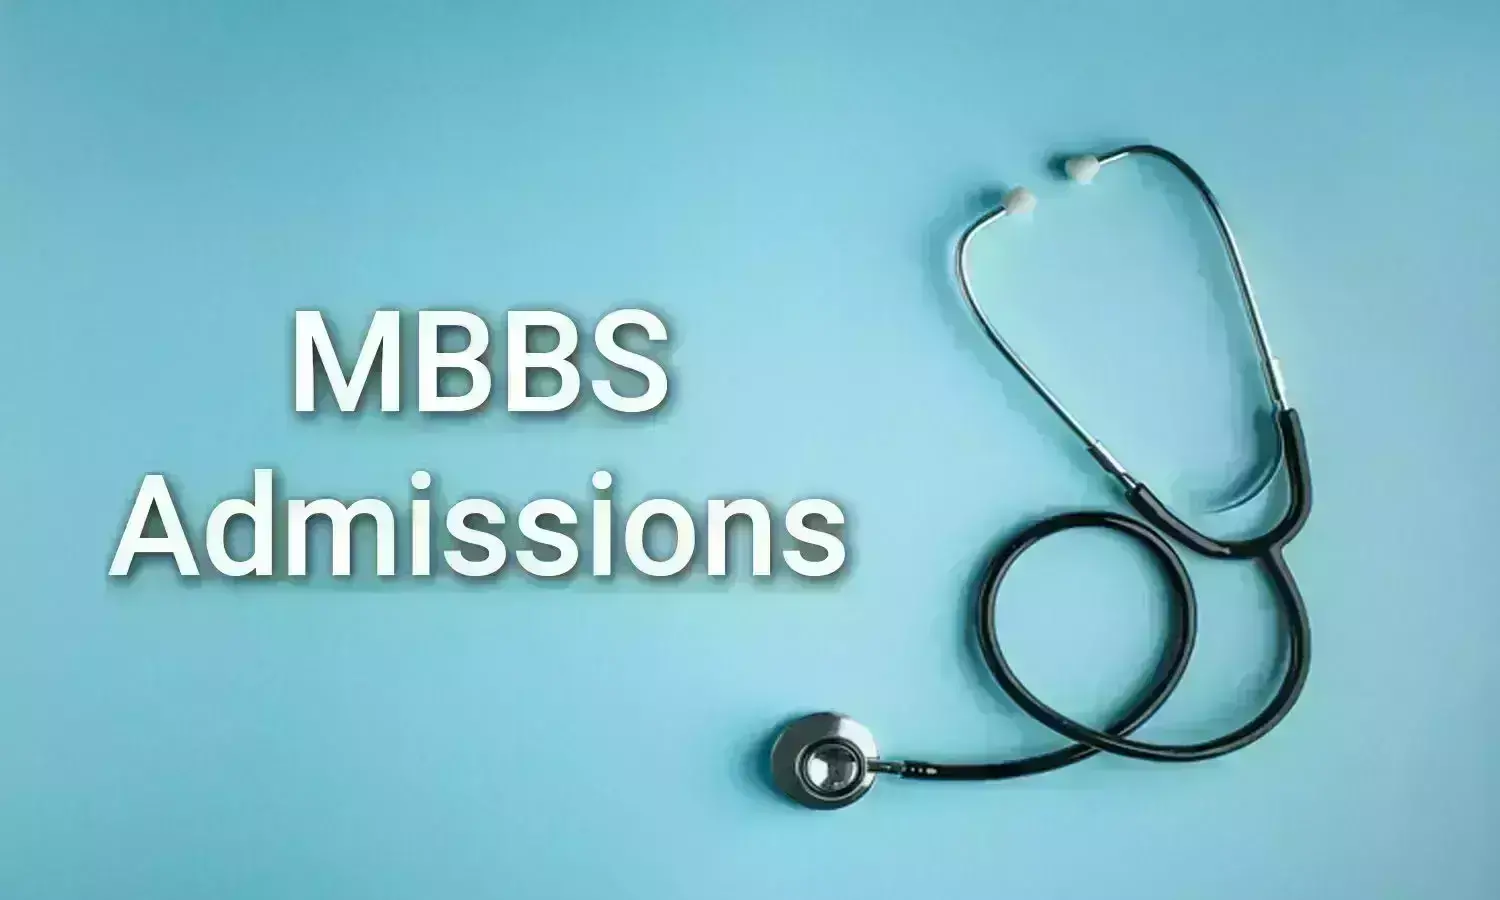 Maha CET Cell issues notice on choice filling for admissions at newly NMC permitted medical college, Details